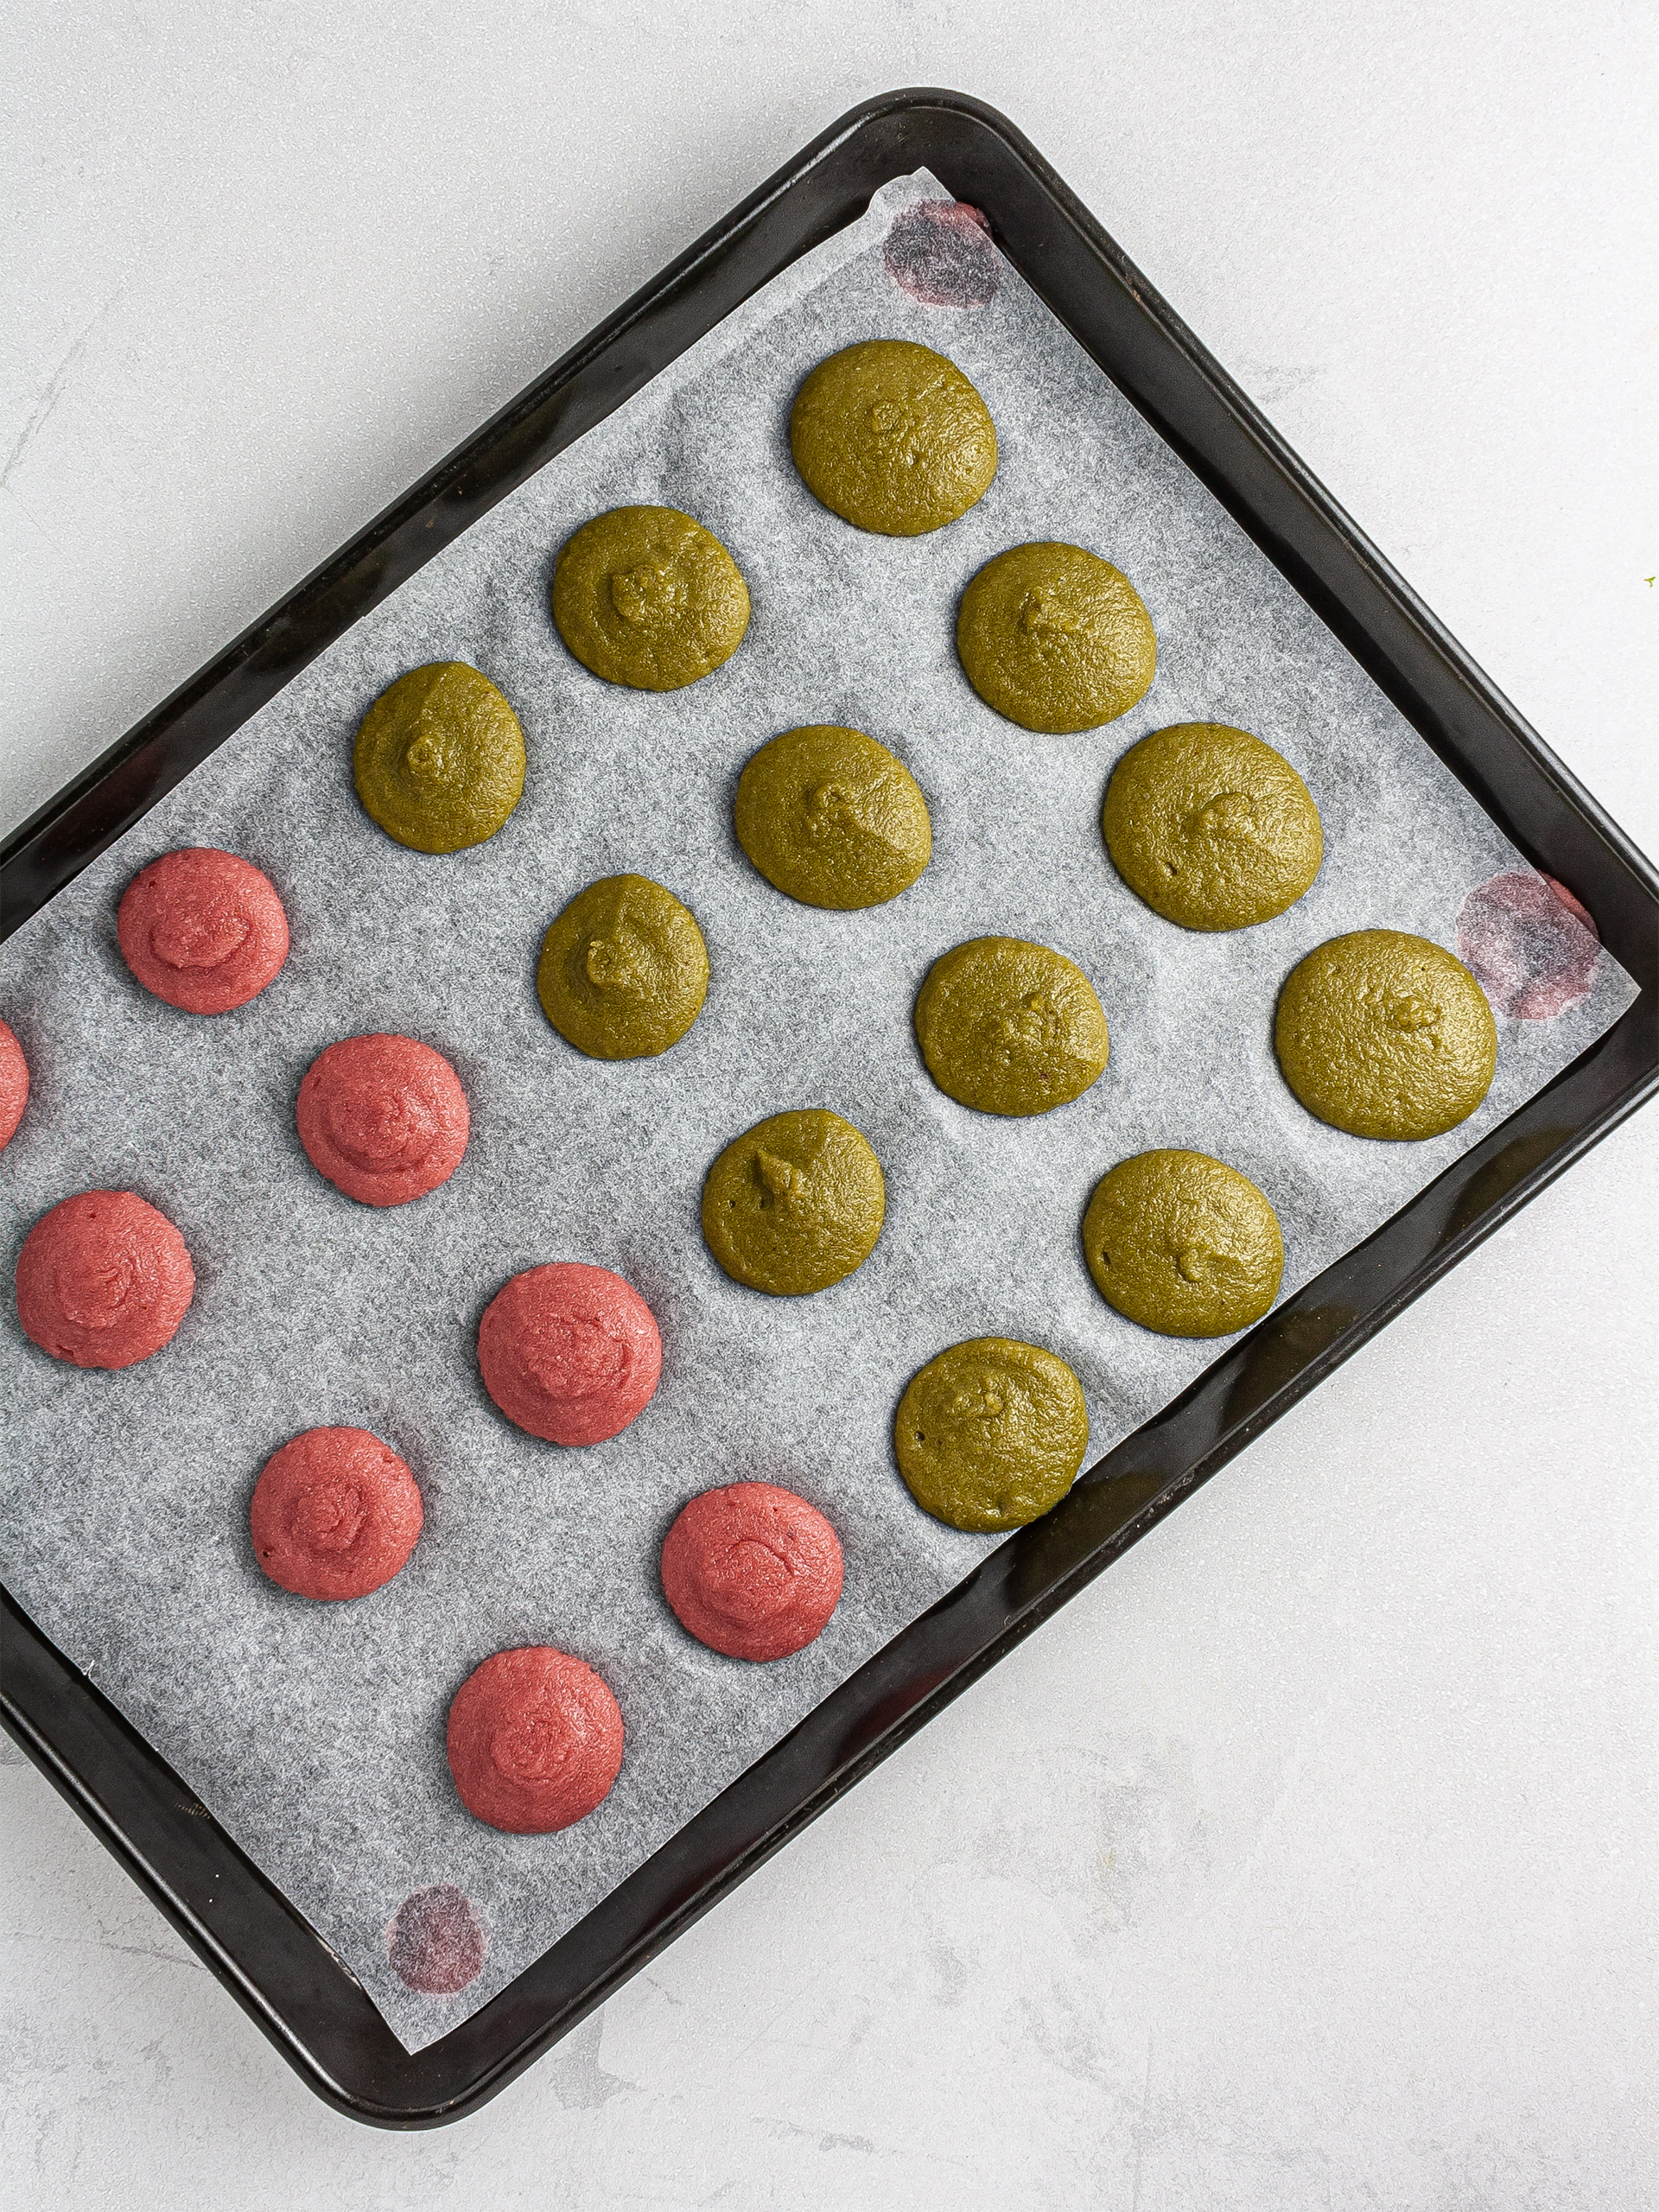 Macaron batter piped over baking tray